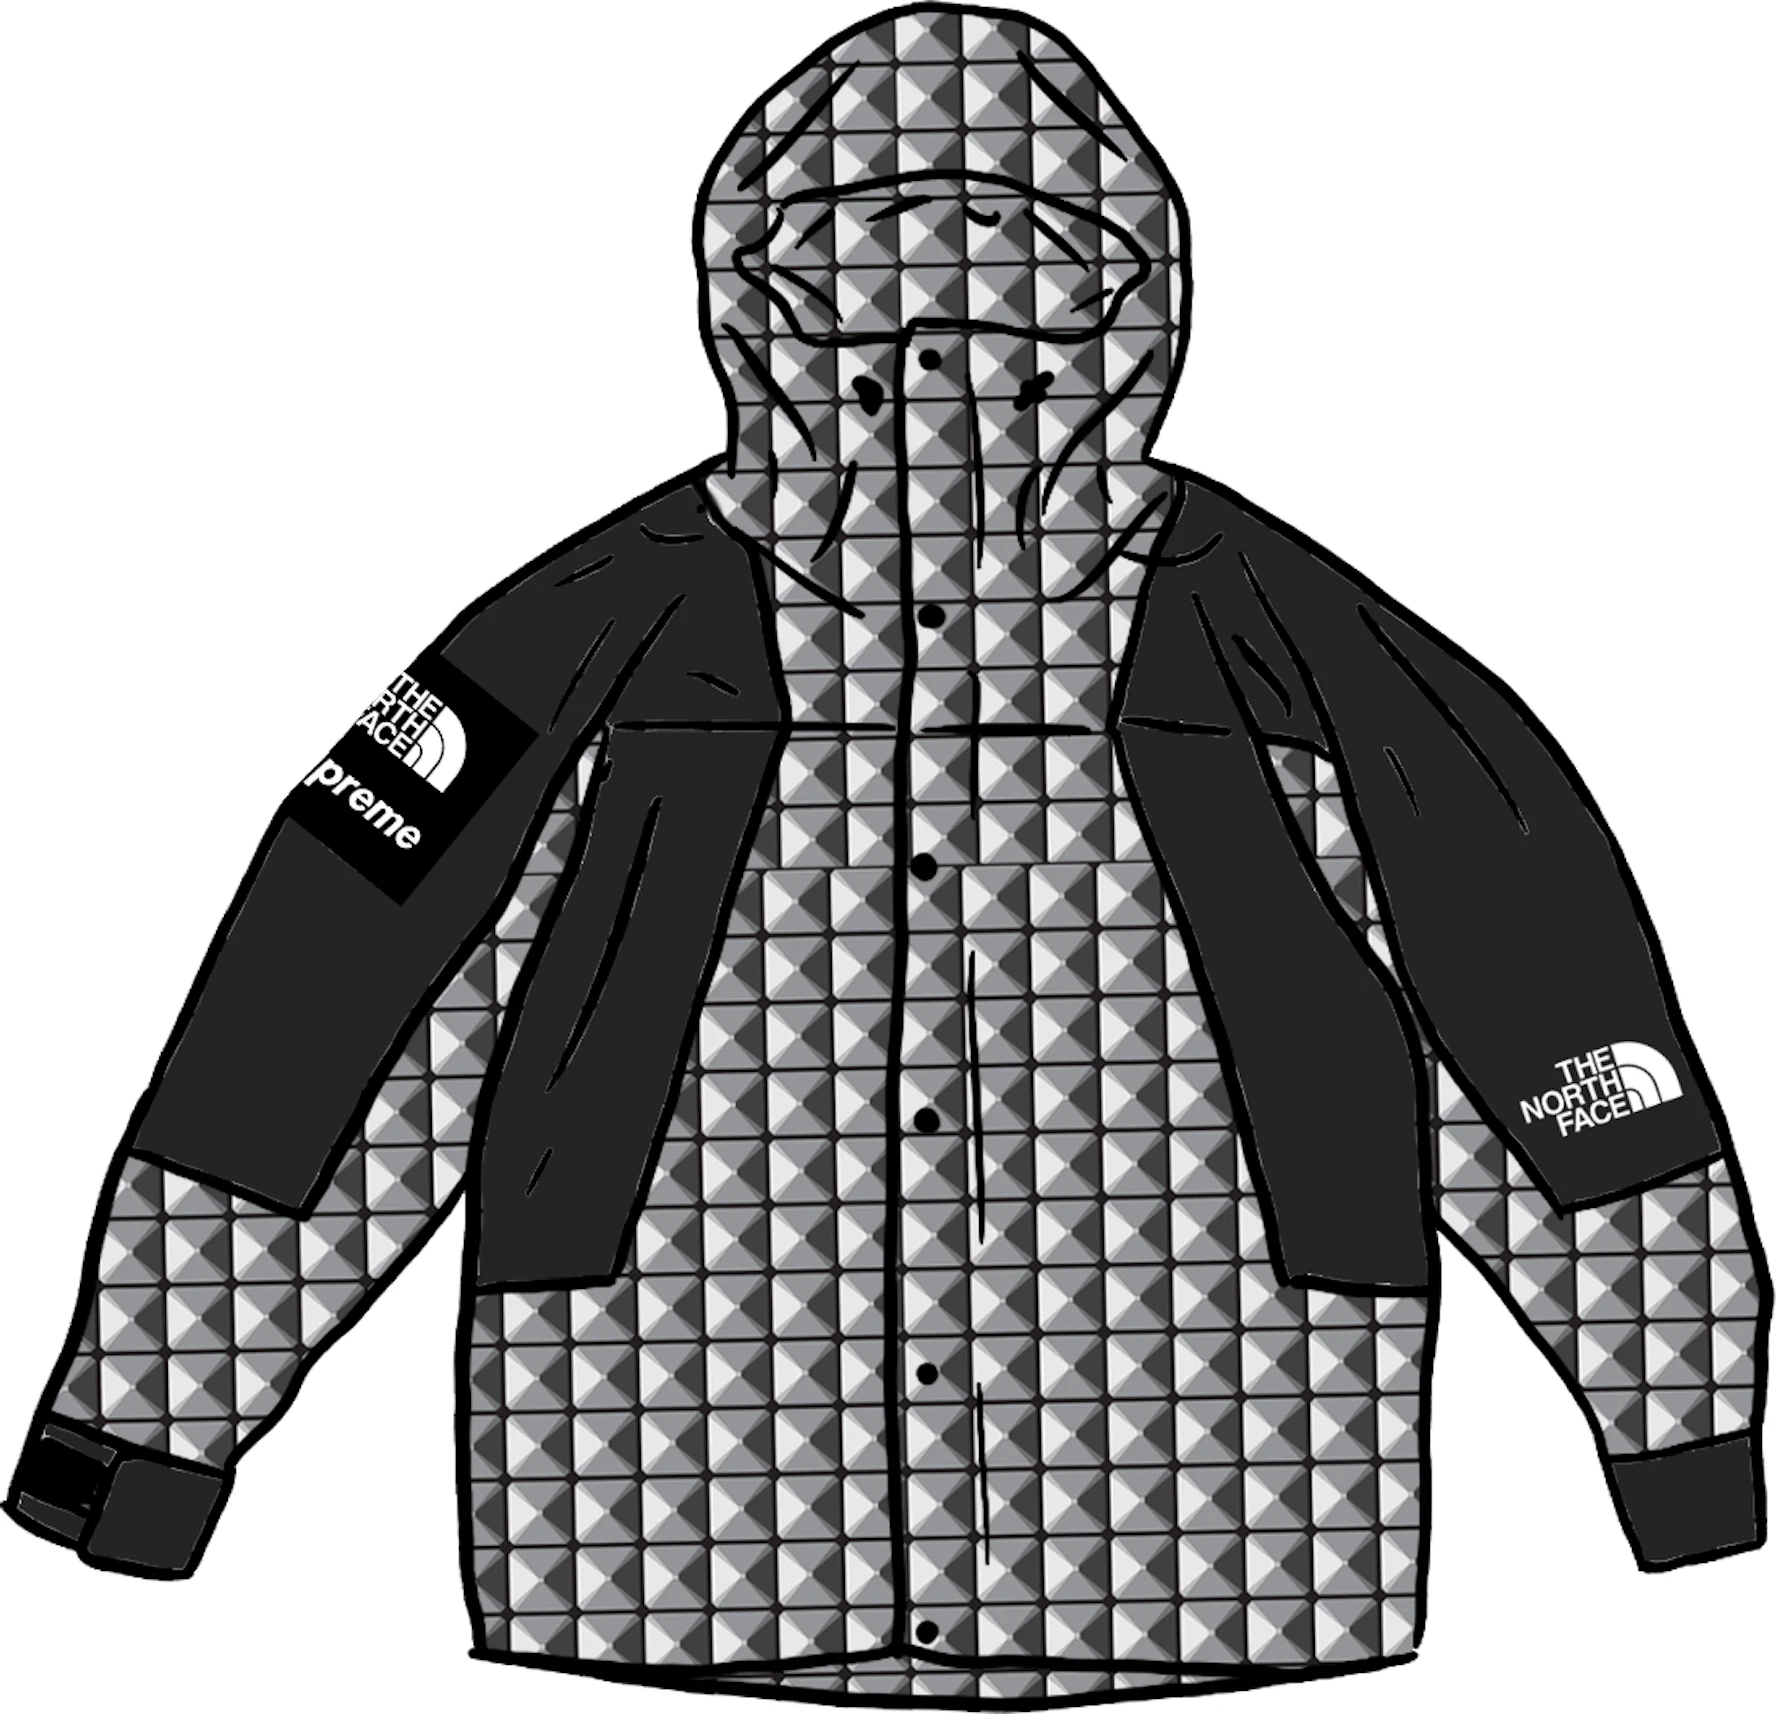 Supreme/The North Face Studded jacket